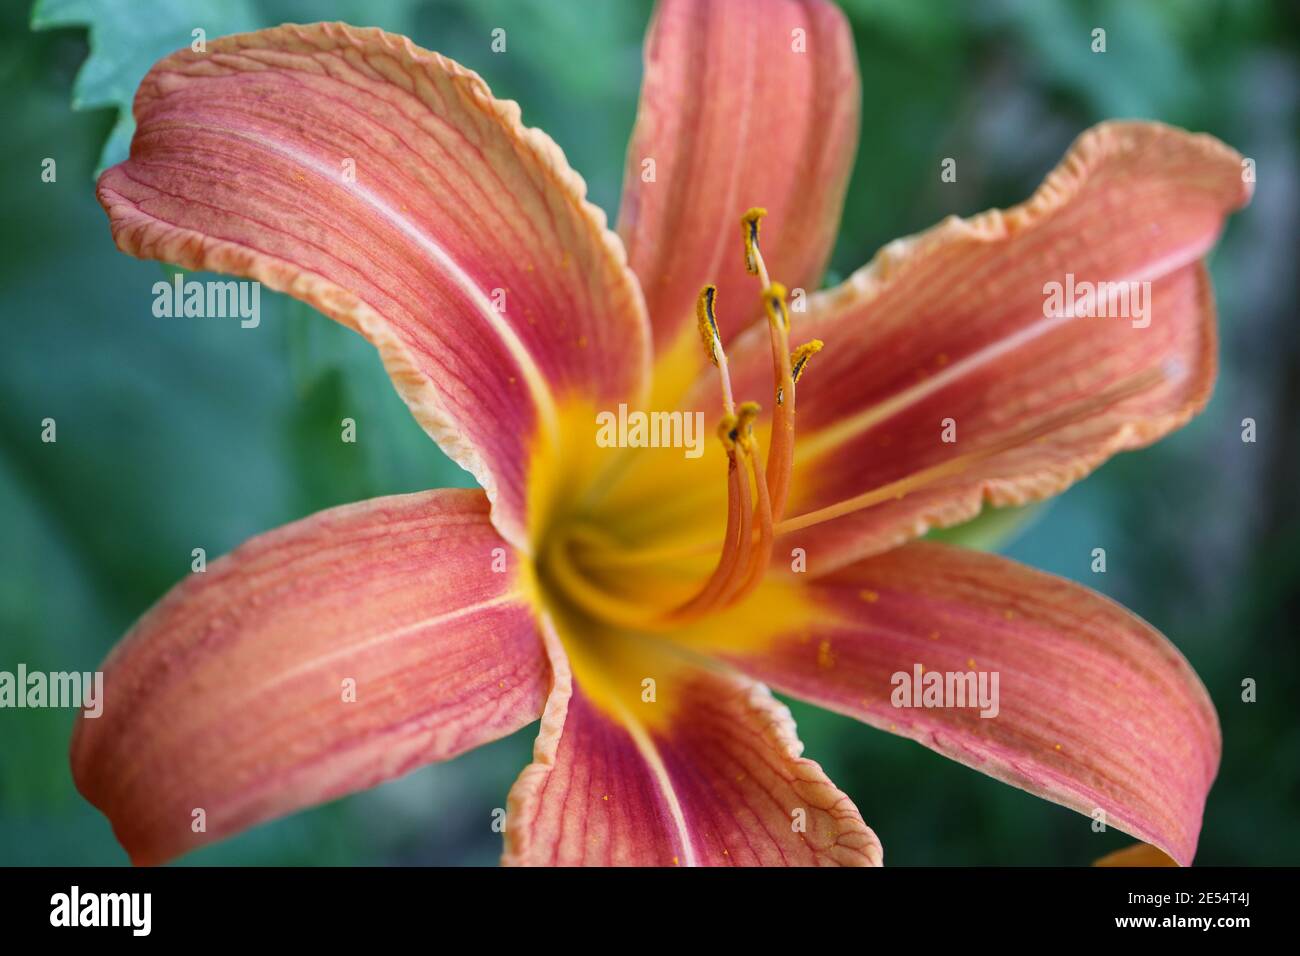 Orange Daylily with long stamens , Hemerocallis Fulva, Daylily in the garden, flower head macro, beauty in nature, floral photo, macro photography Stock Photo